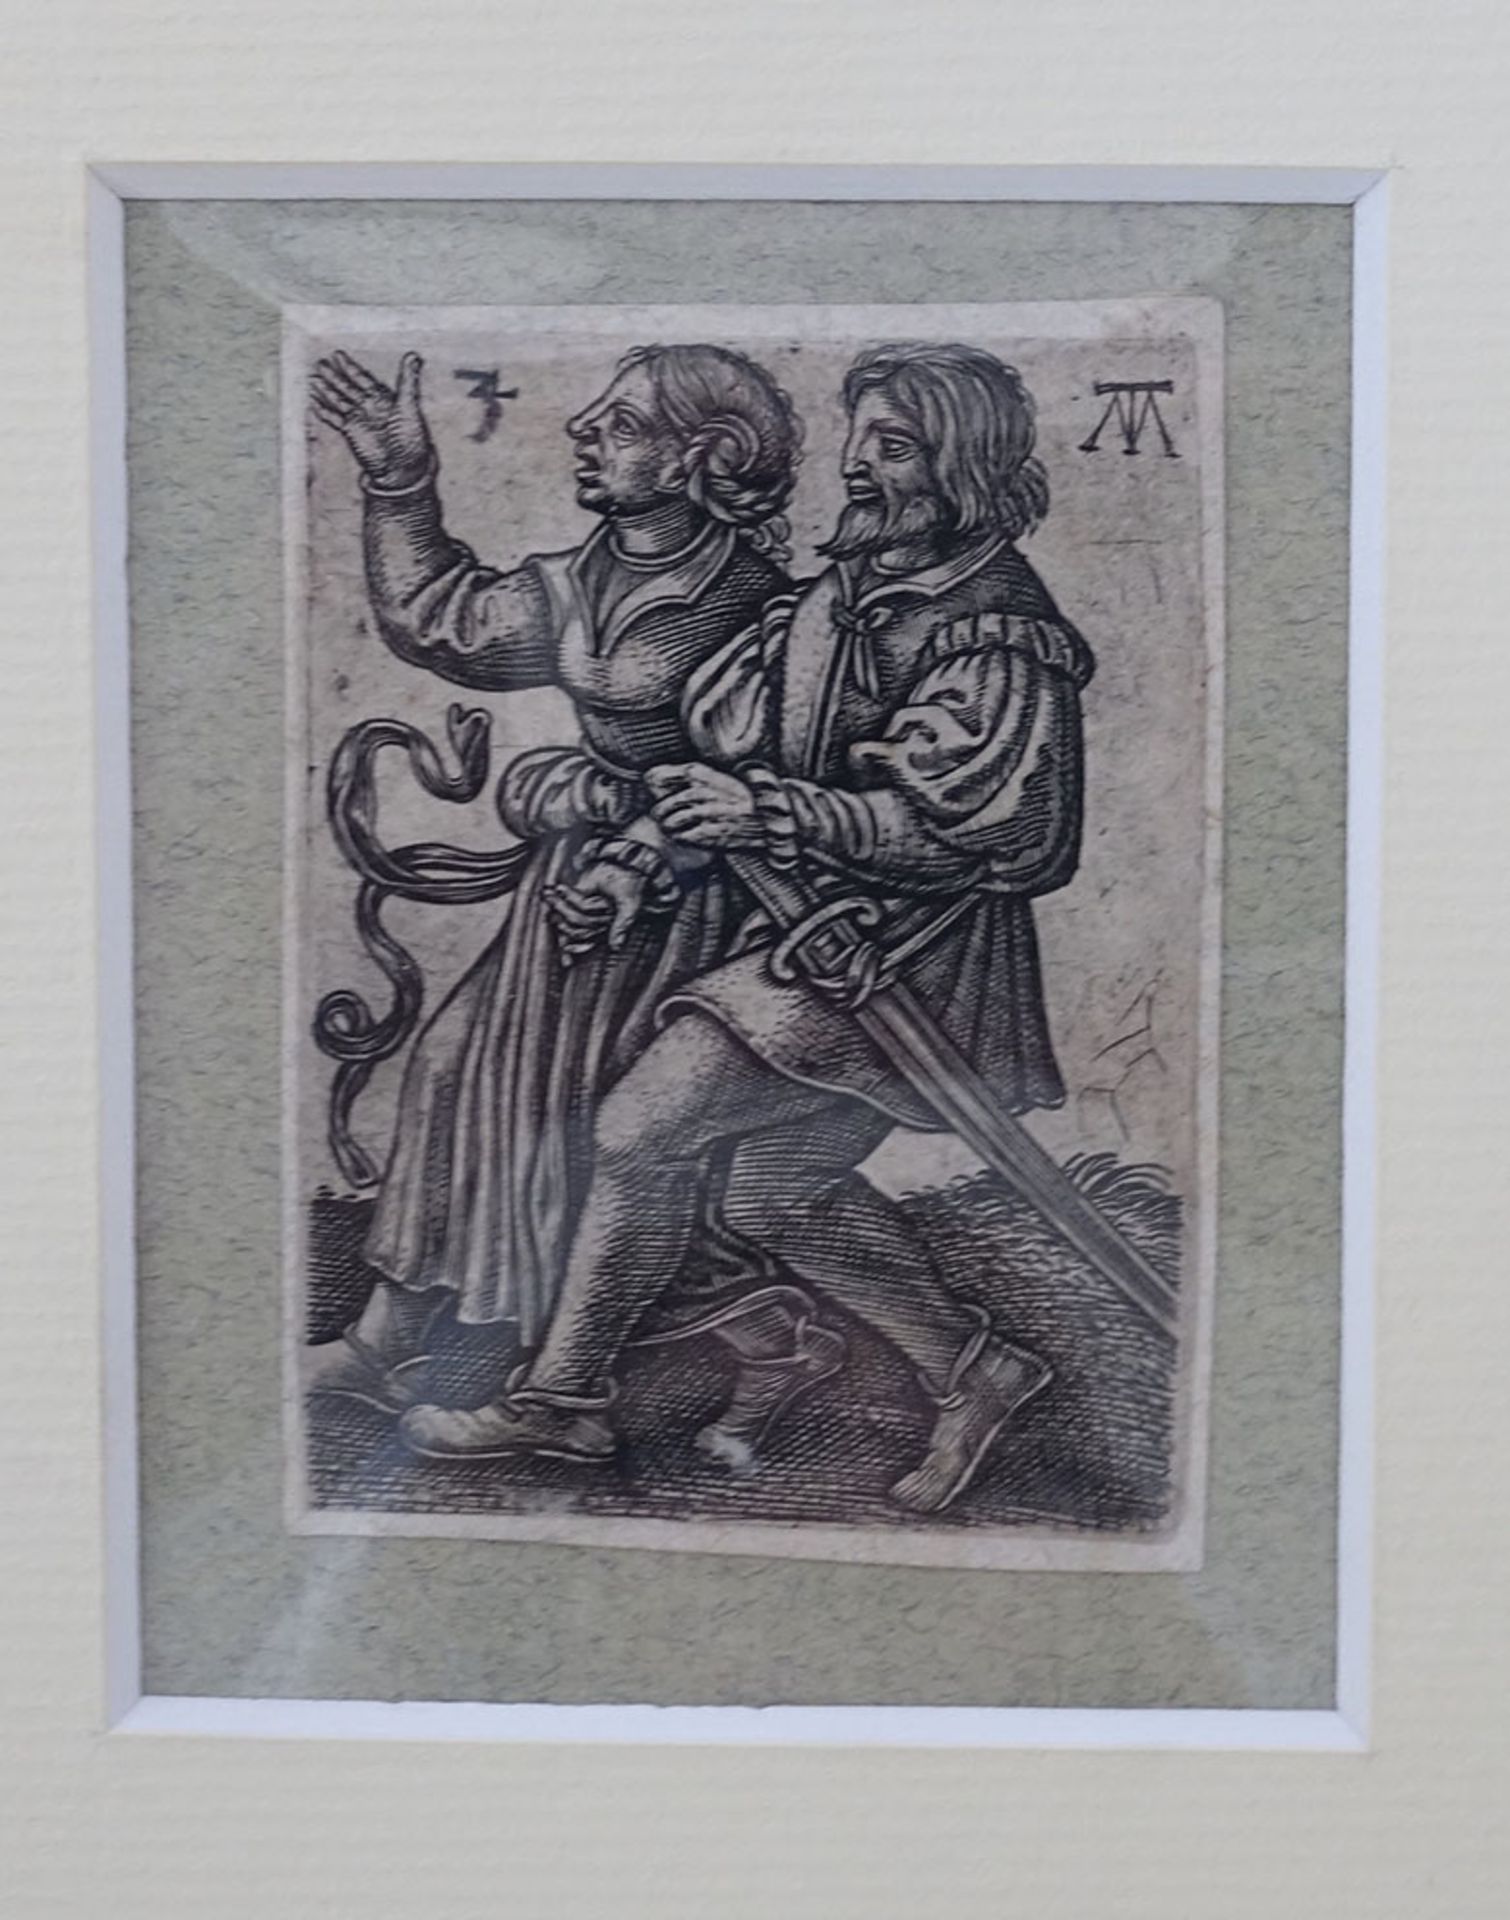 TREU, Martin (active c. 1540-1543). (Dancing peasant couple in profile to the left). c. 1540?. Engr.